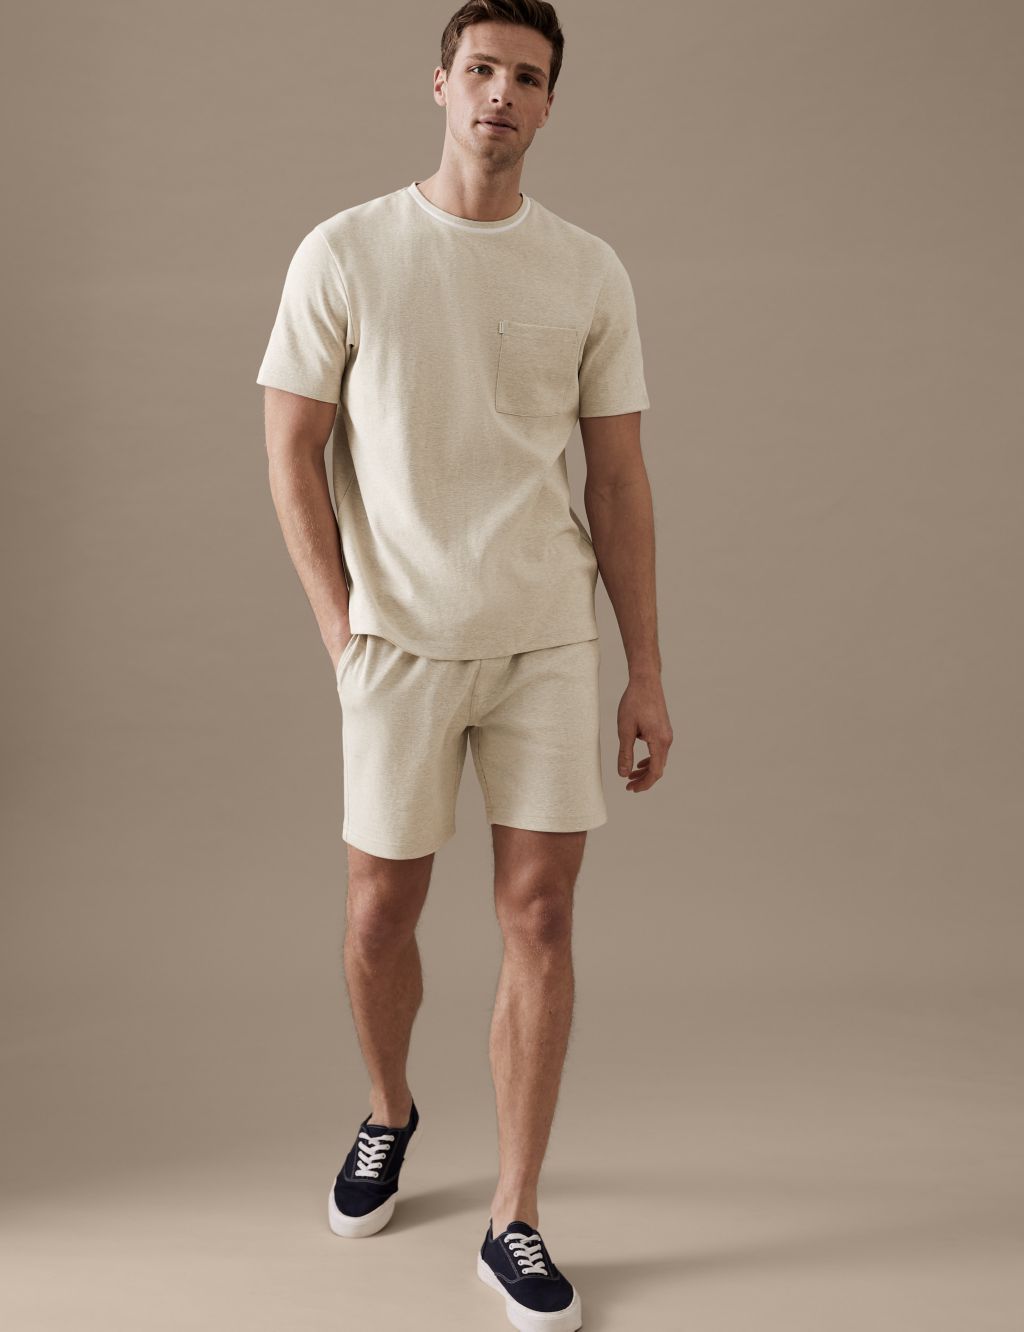 Textured Pure Cotton Jersey Shorts image 1